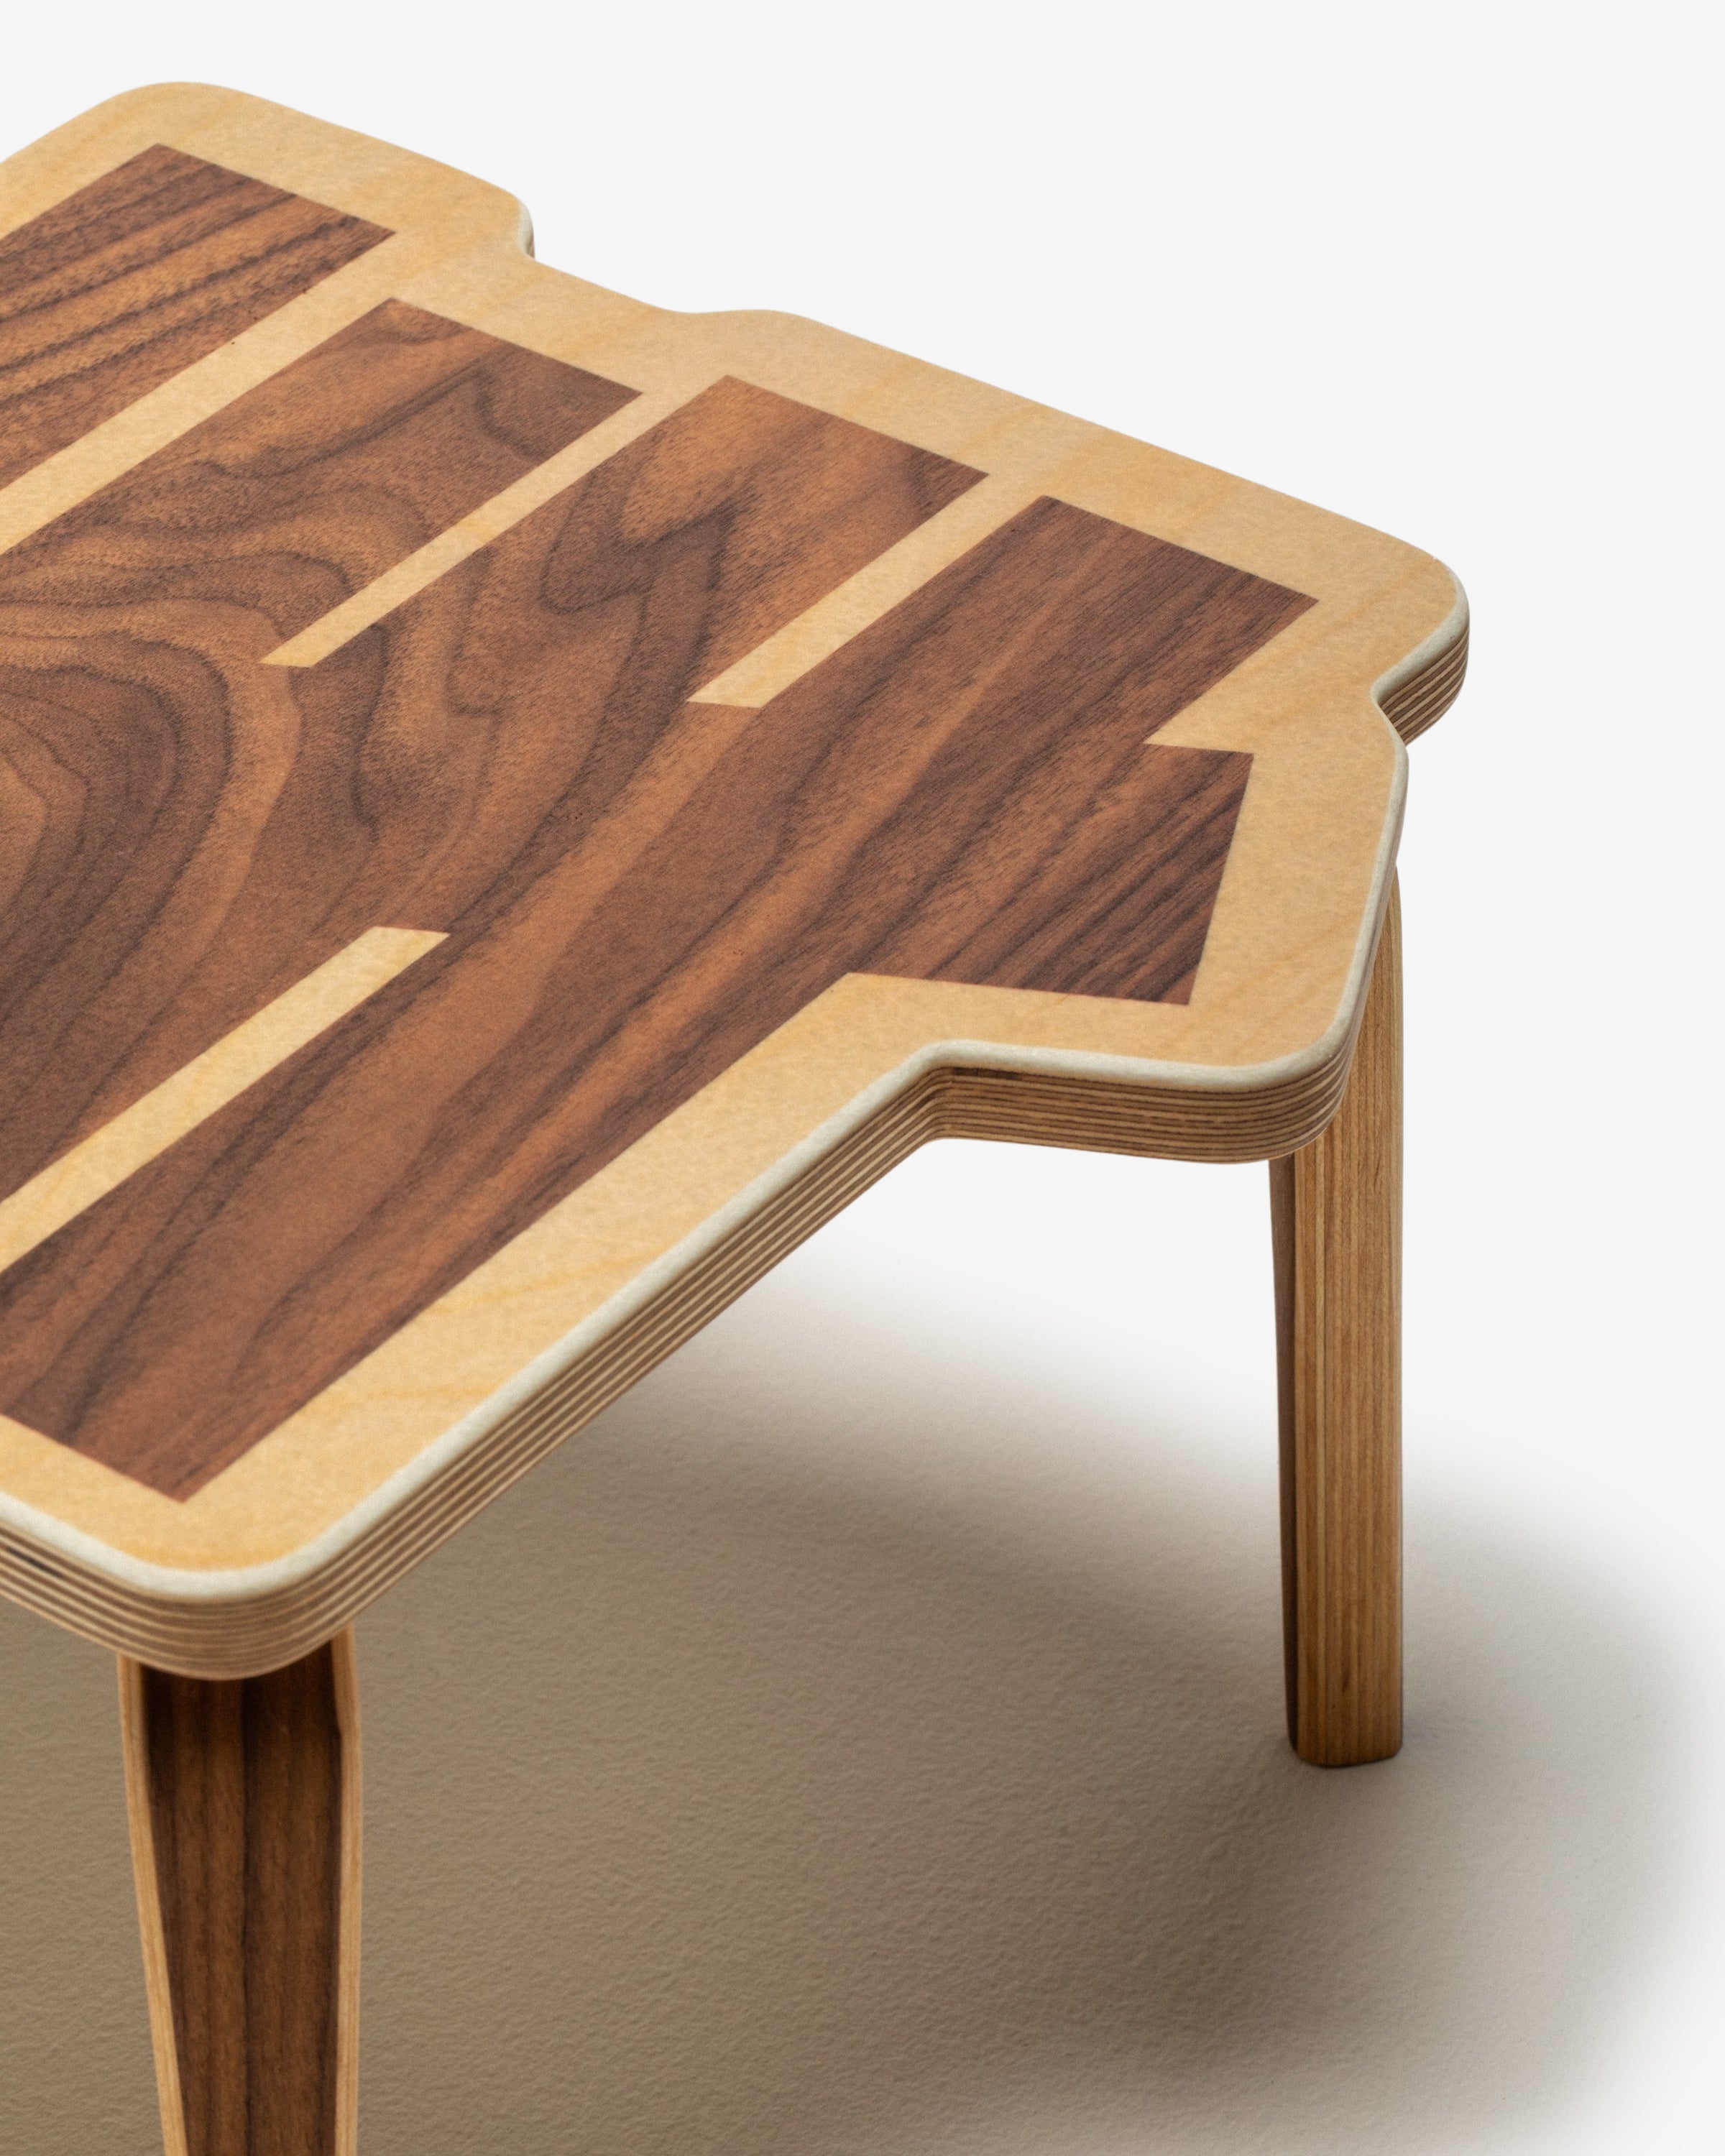 UNDEFEATED X MODERNICA SIDE TABLE - NATURAL/ WALNUT